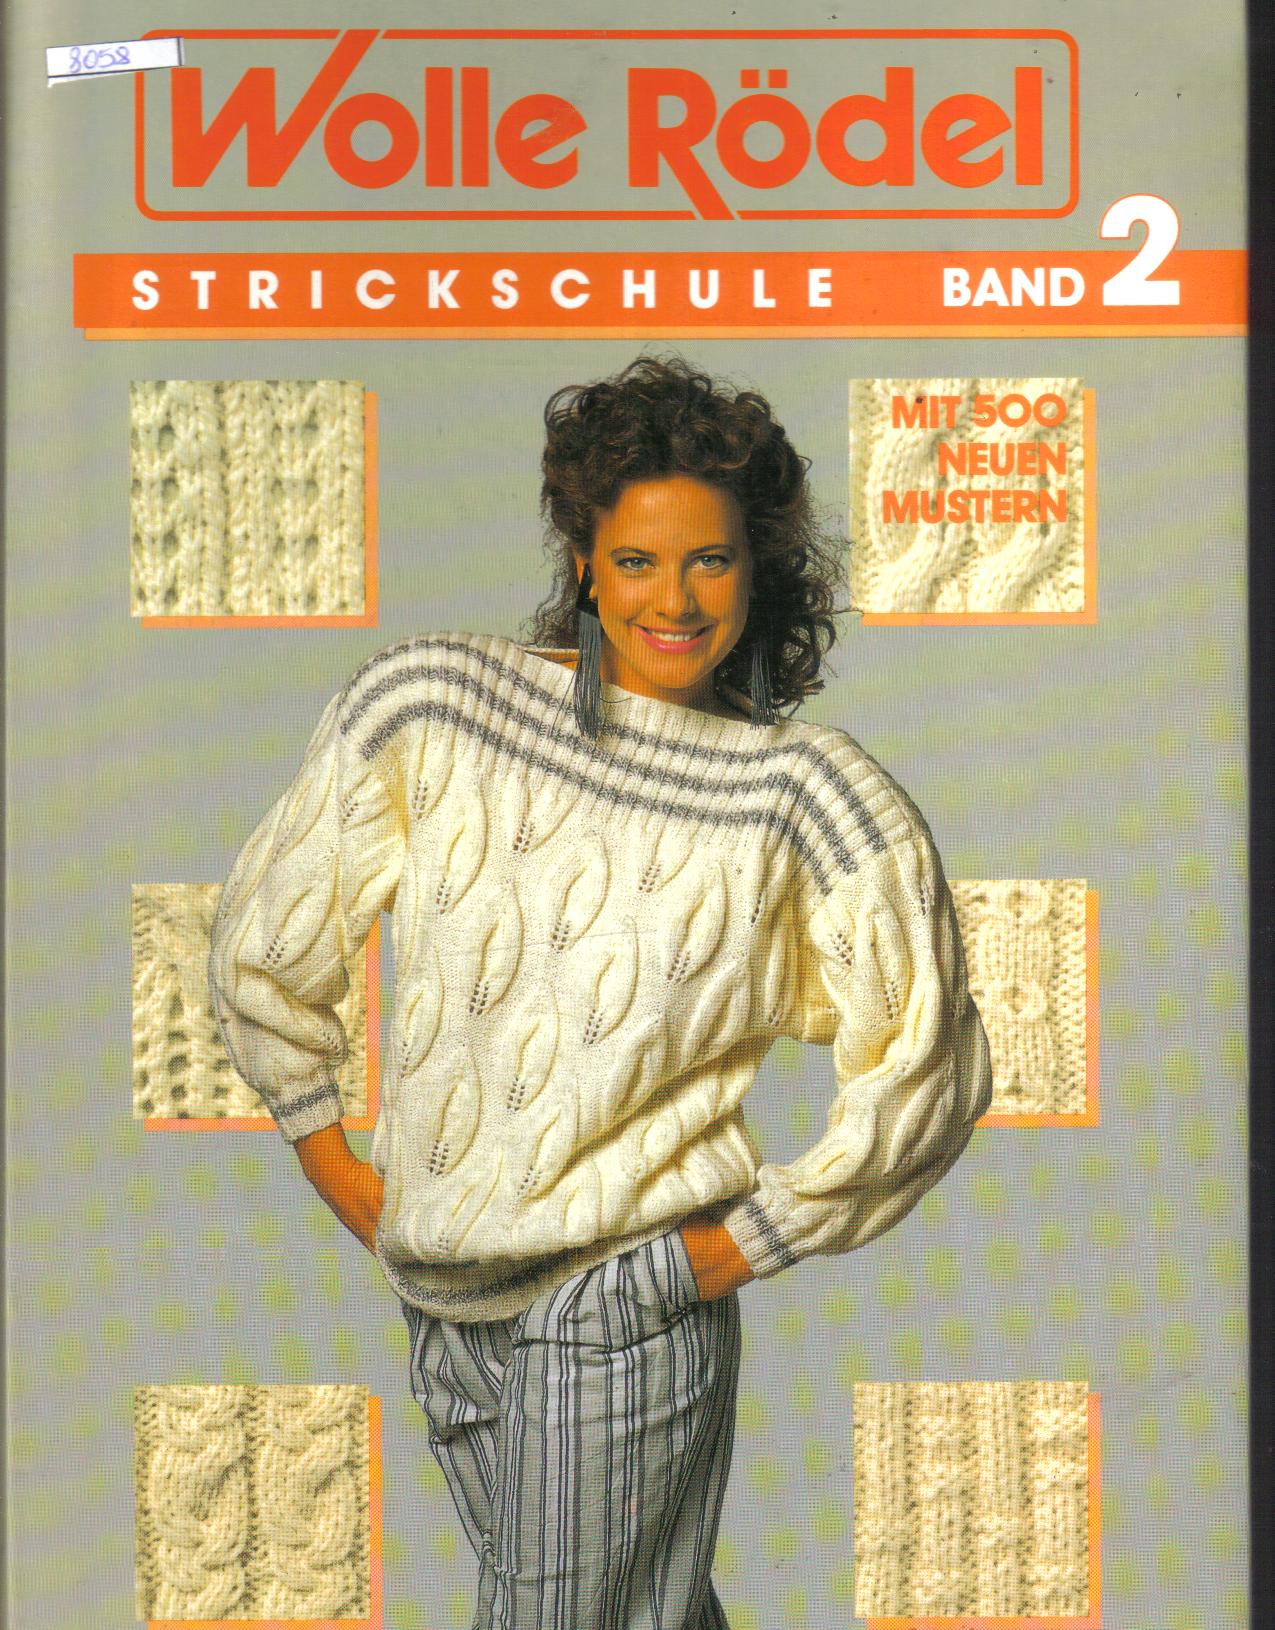 Strickschule Band 2Wolle Roedel